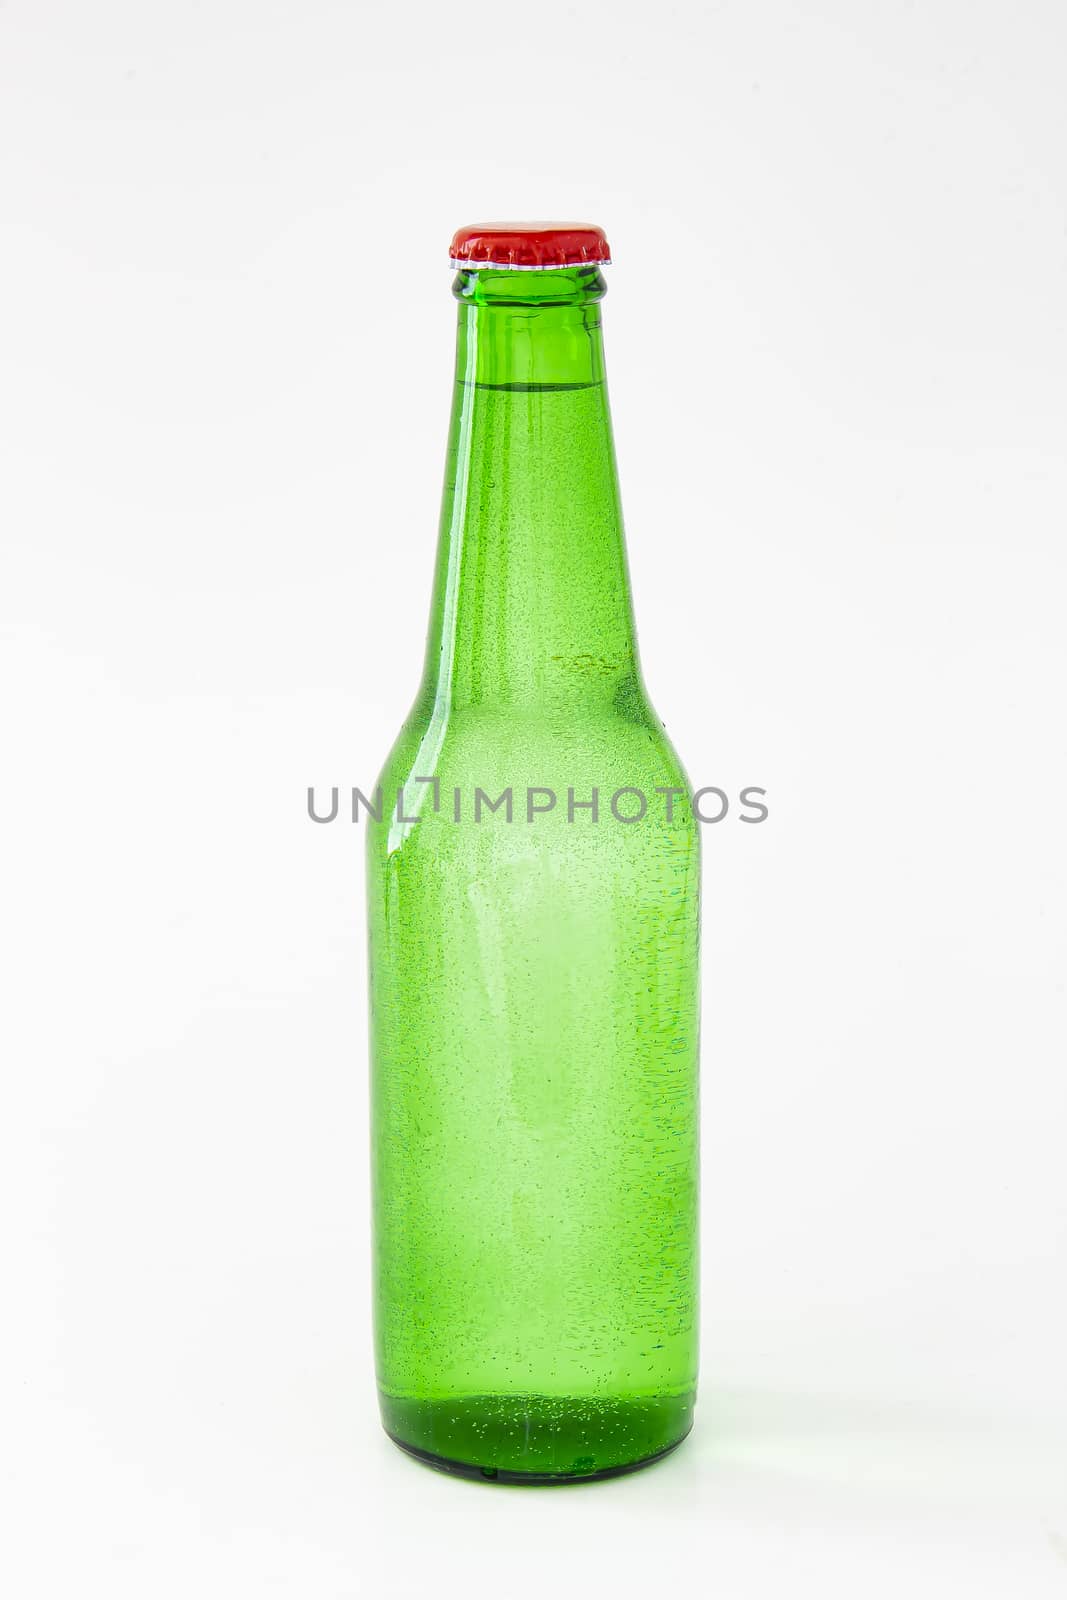 Green Beer Bottle isolated on white background